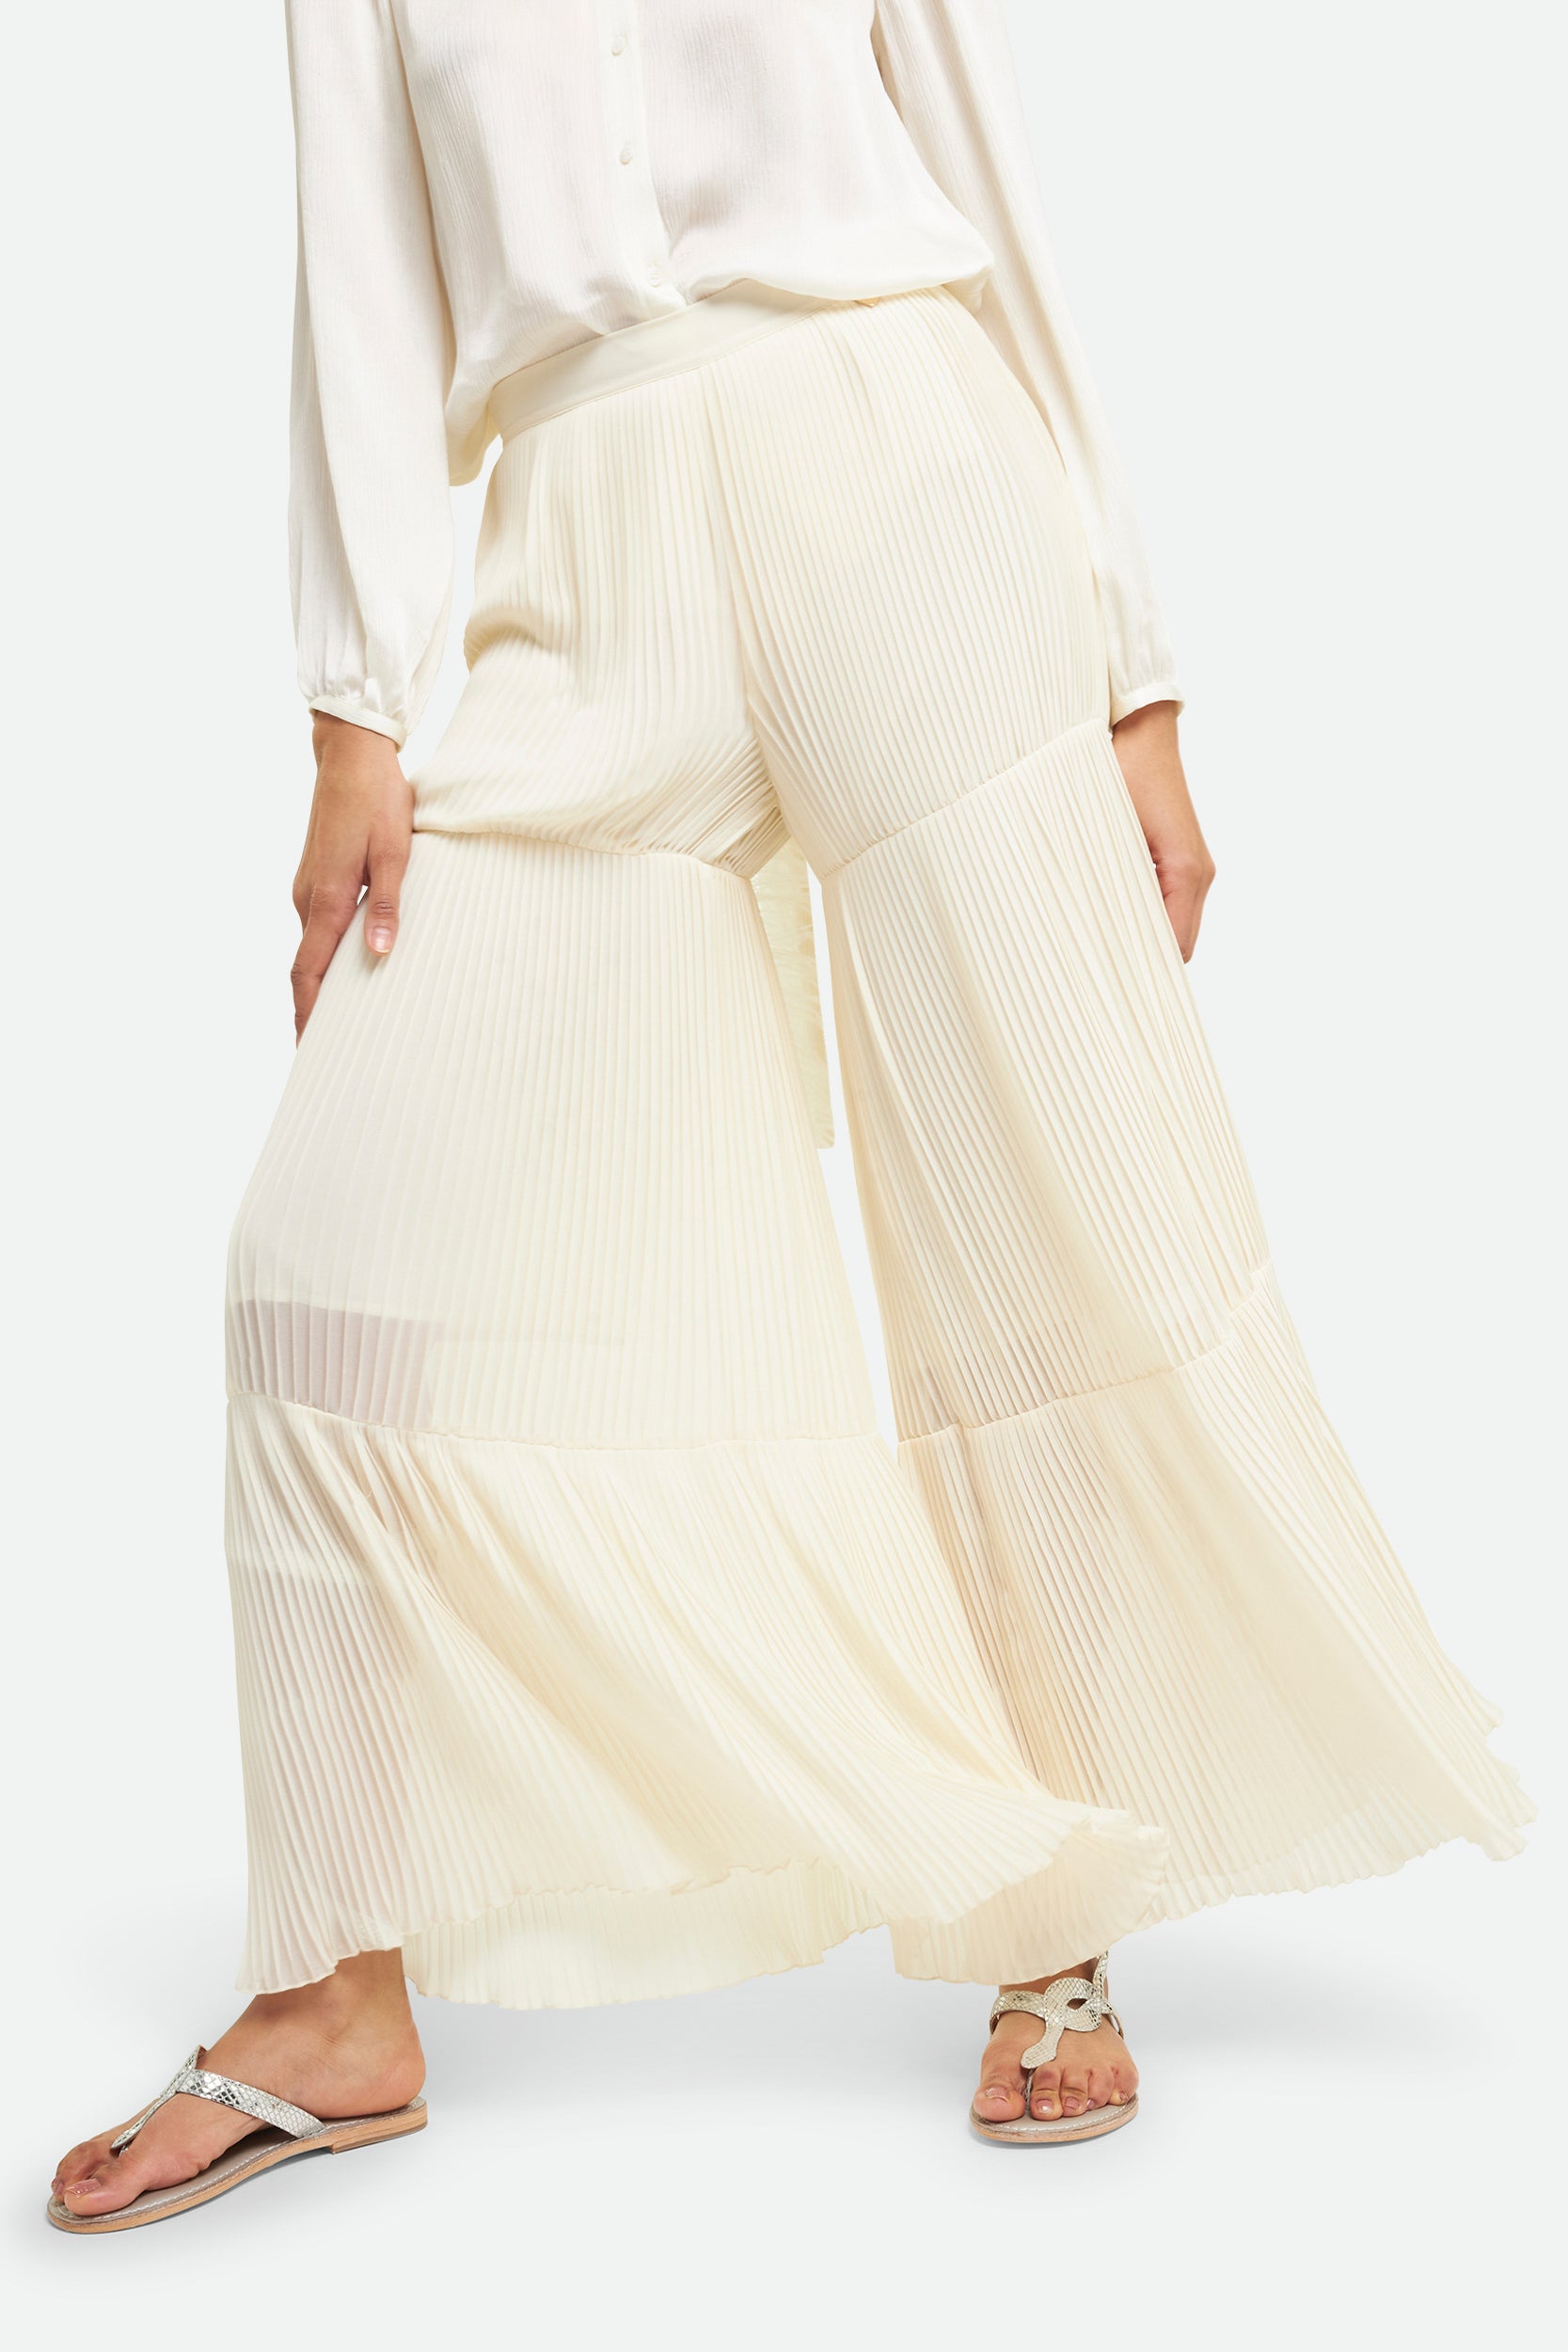 Twinset White Georgette Trousers